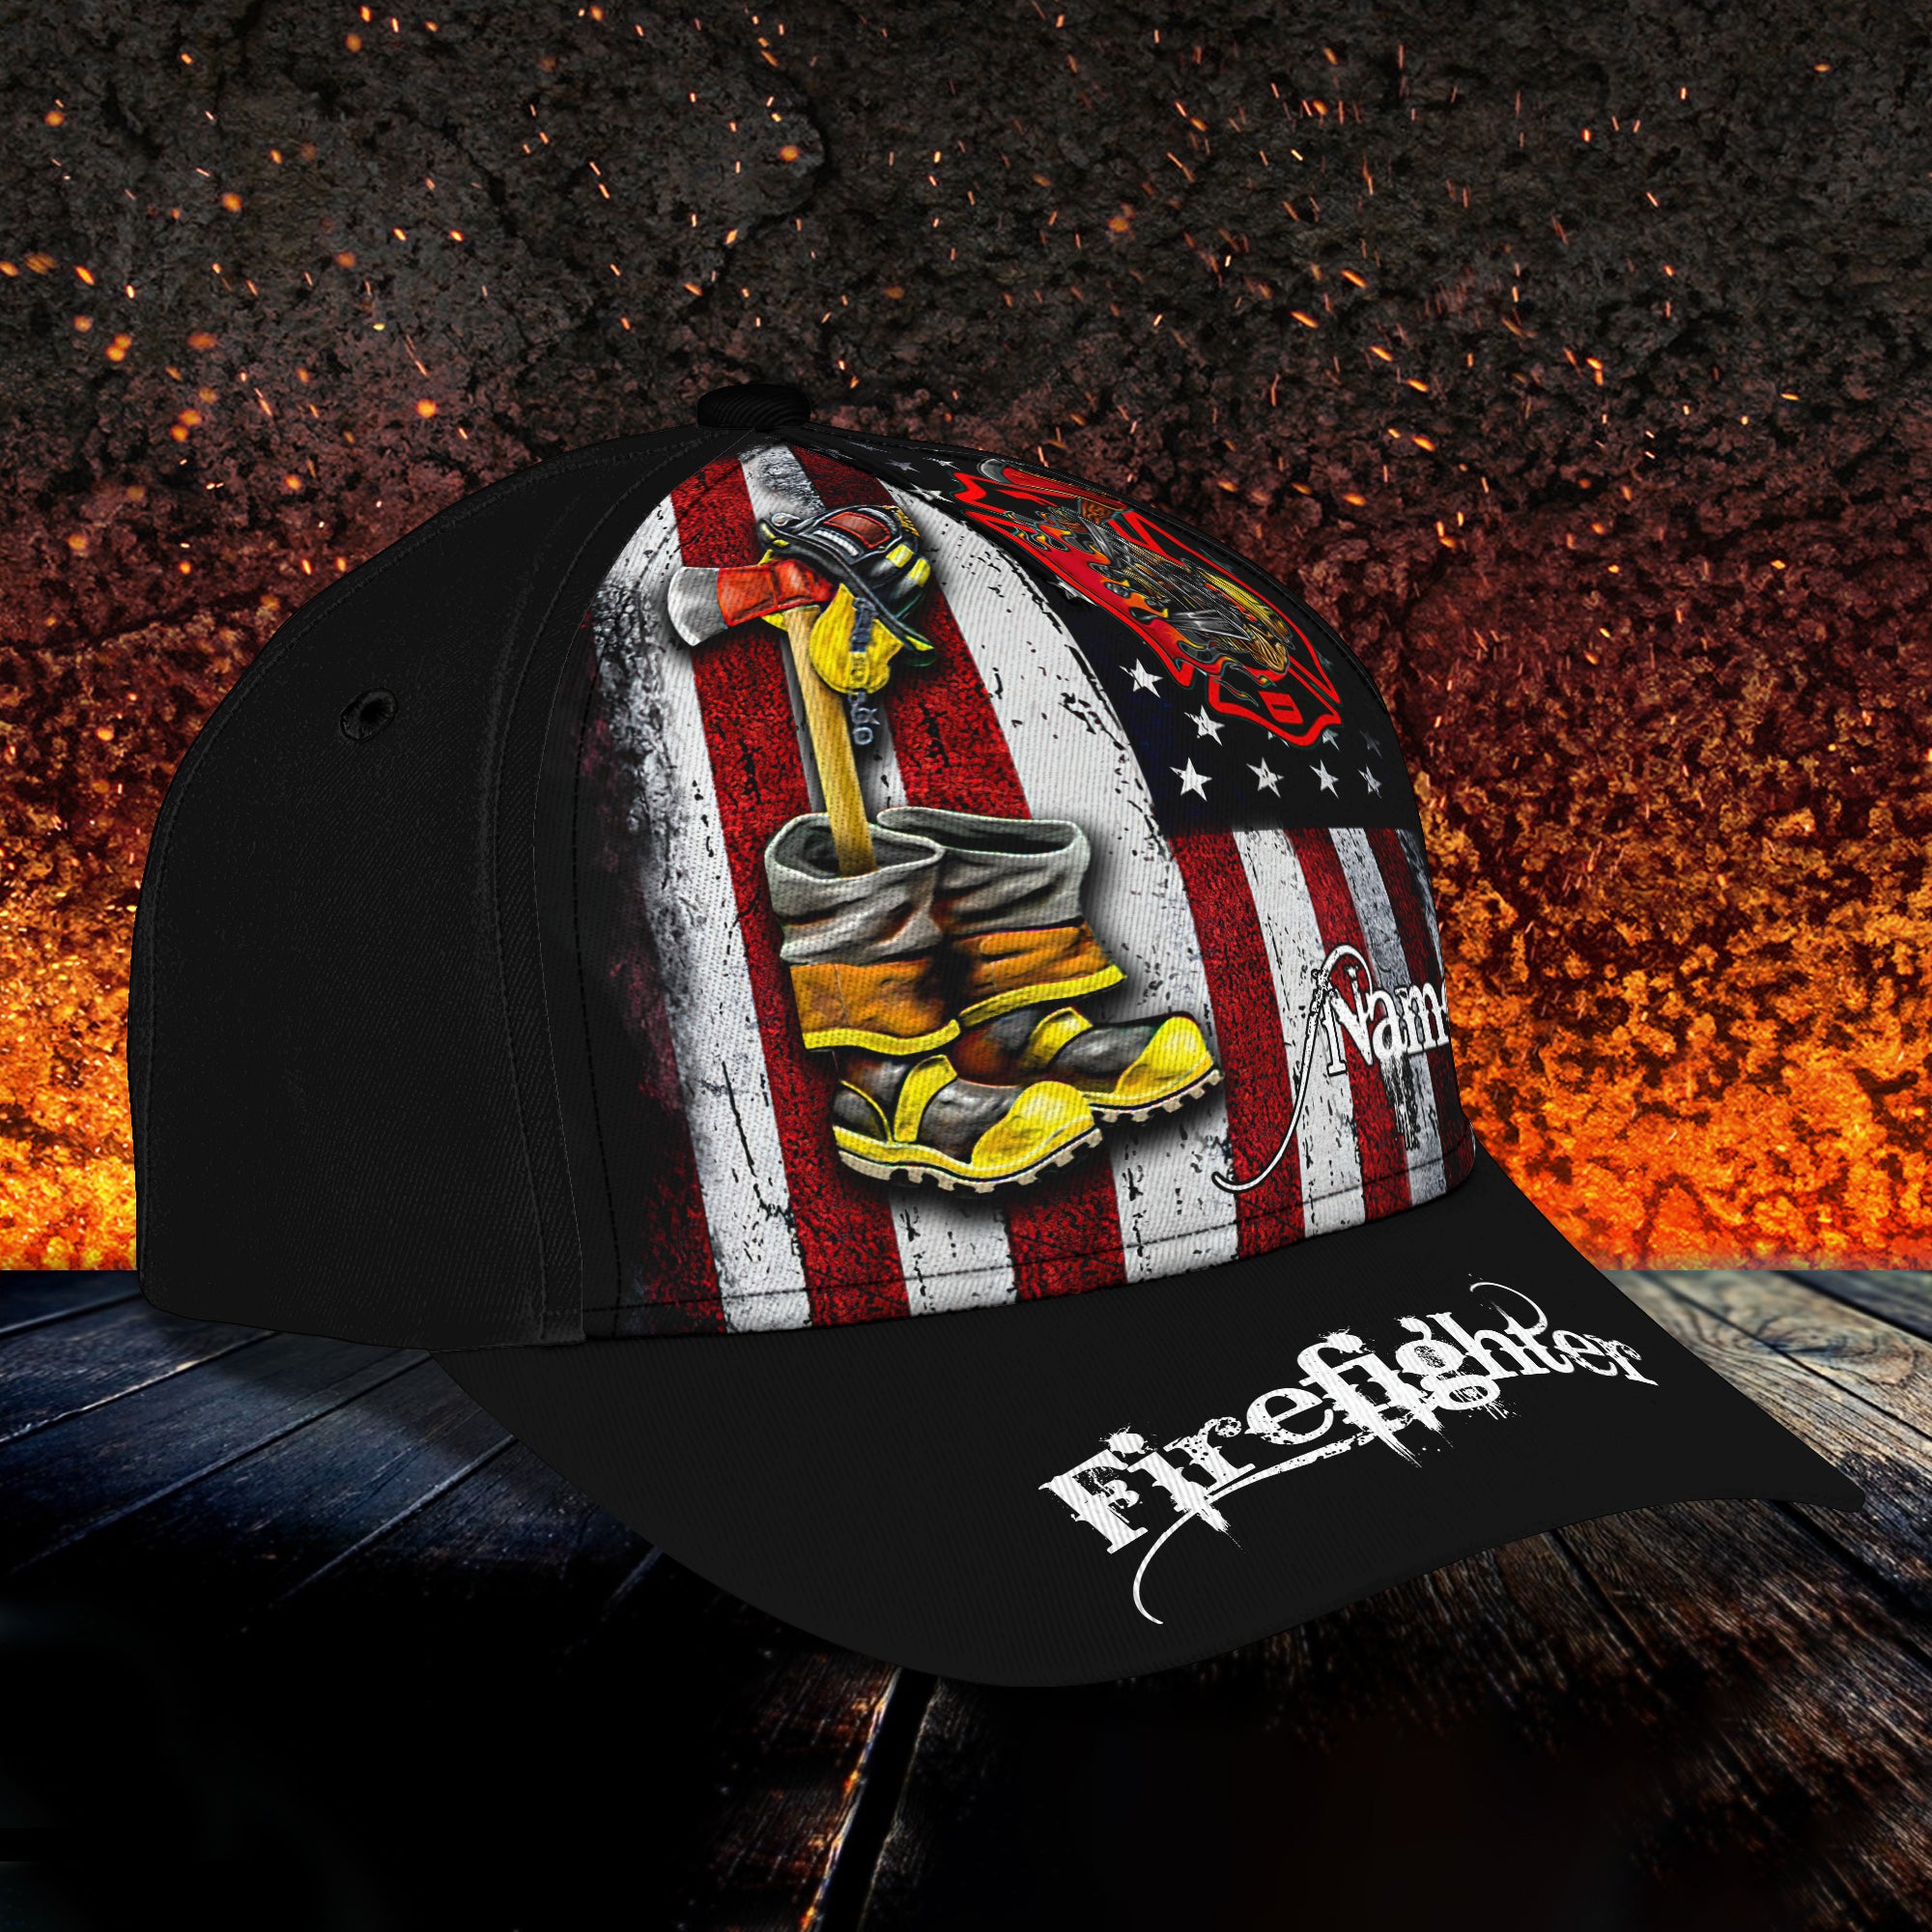 Firefighter 18 - Personalized Name Cap - QA99